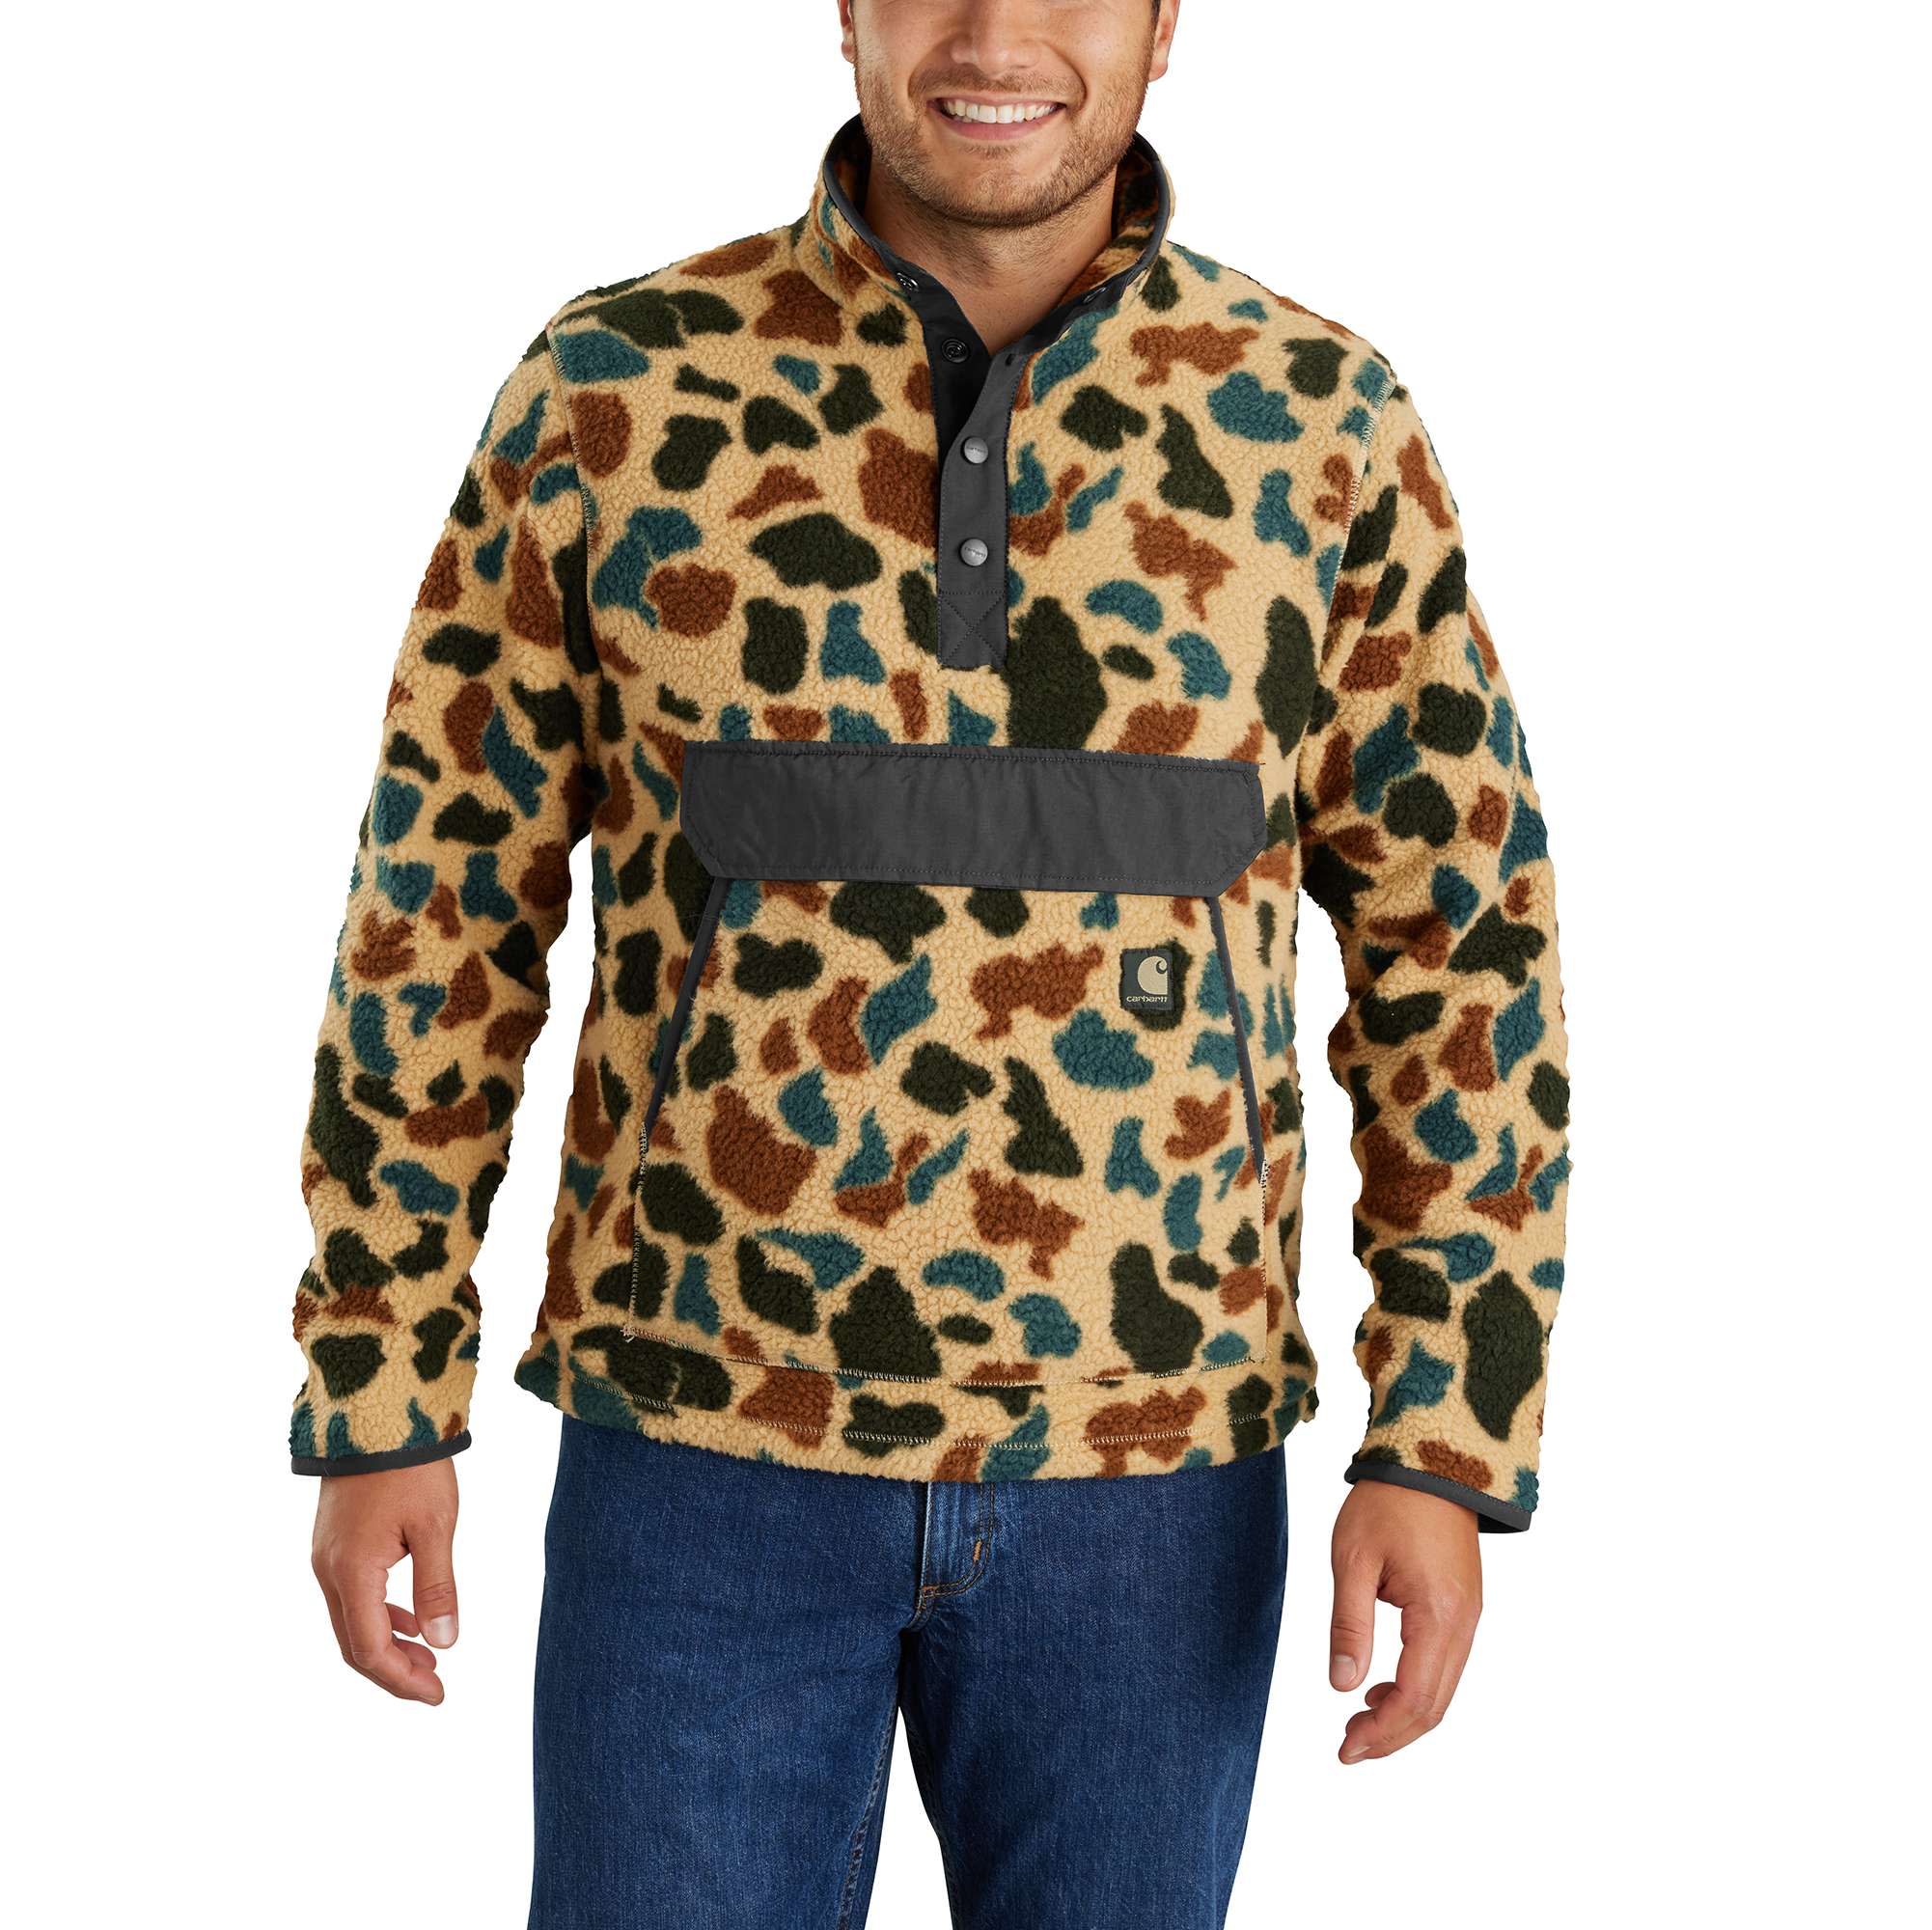 Relaxed Fit Fleece Snap Front Jacket - 2 Warmer Rating | Carhartt Reworked